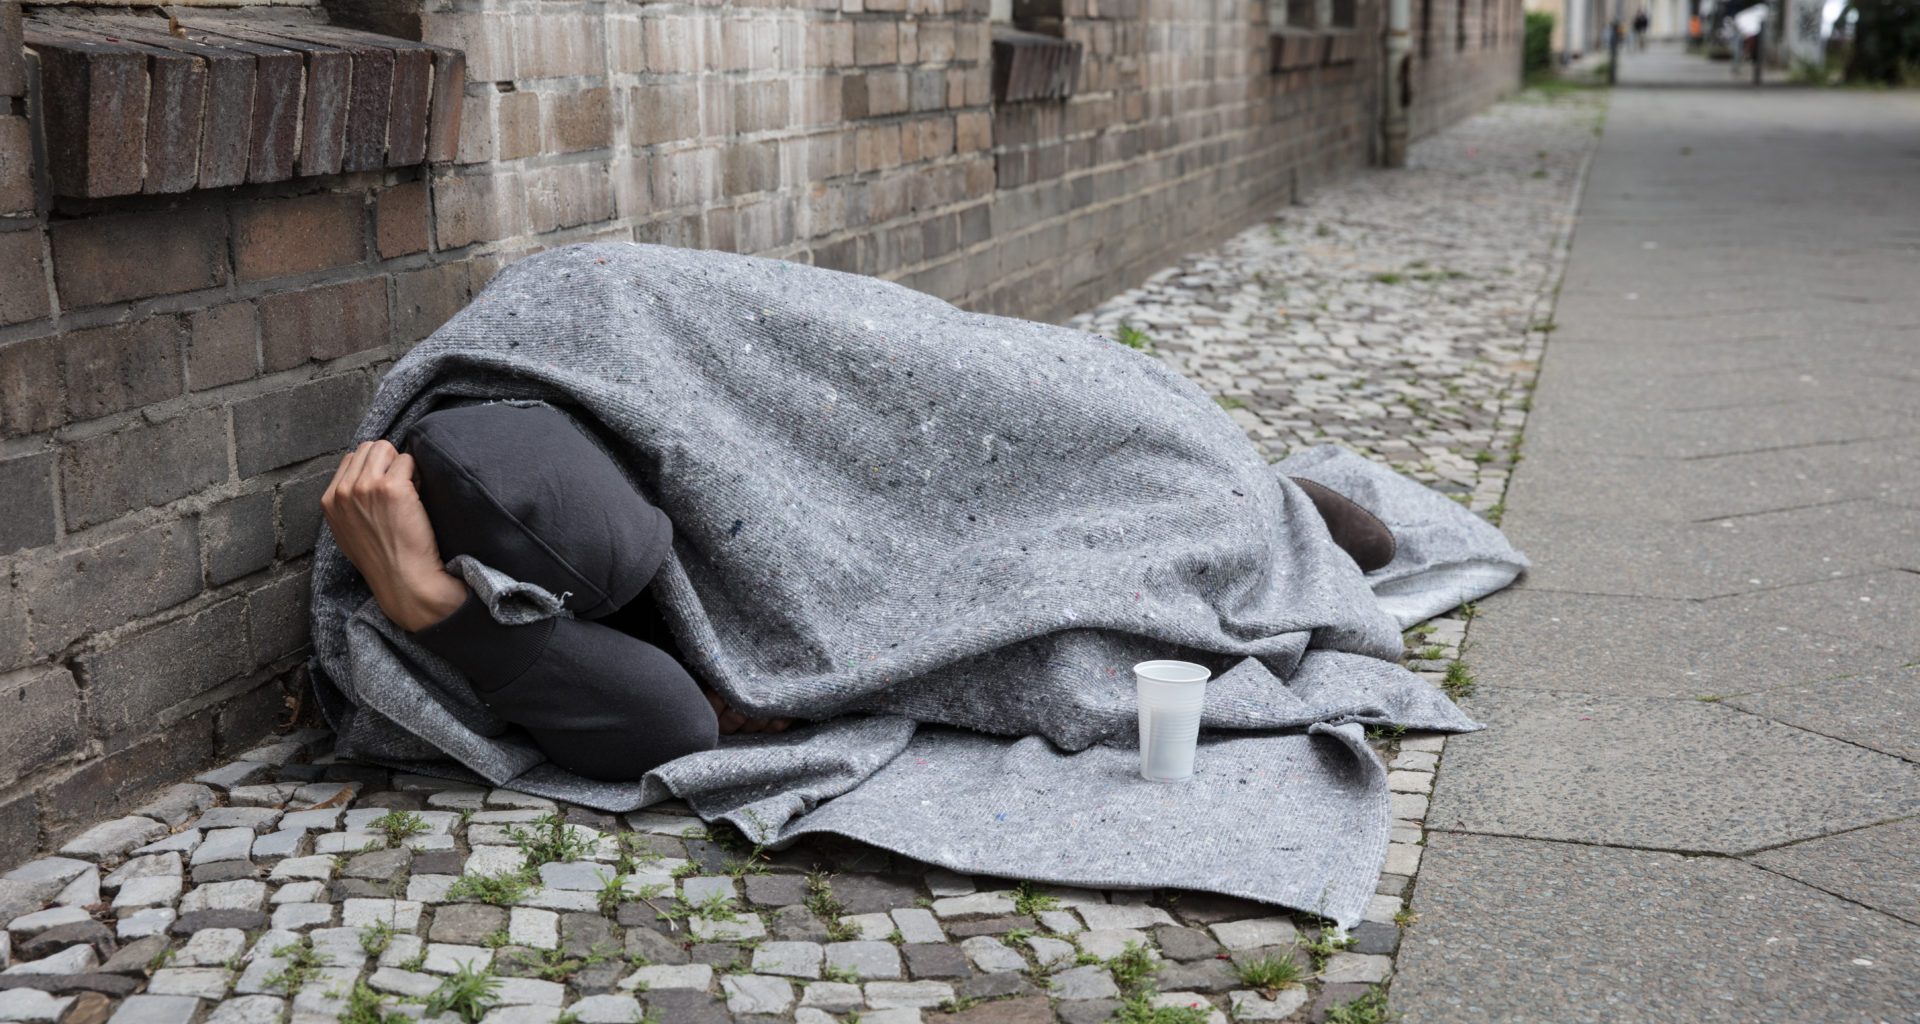 'Shocking' figures show half of record number of homeless deaths related to drugs 4